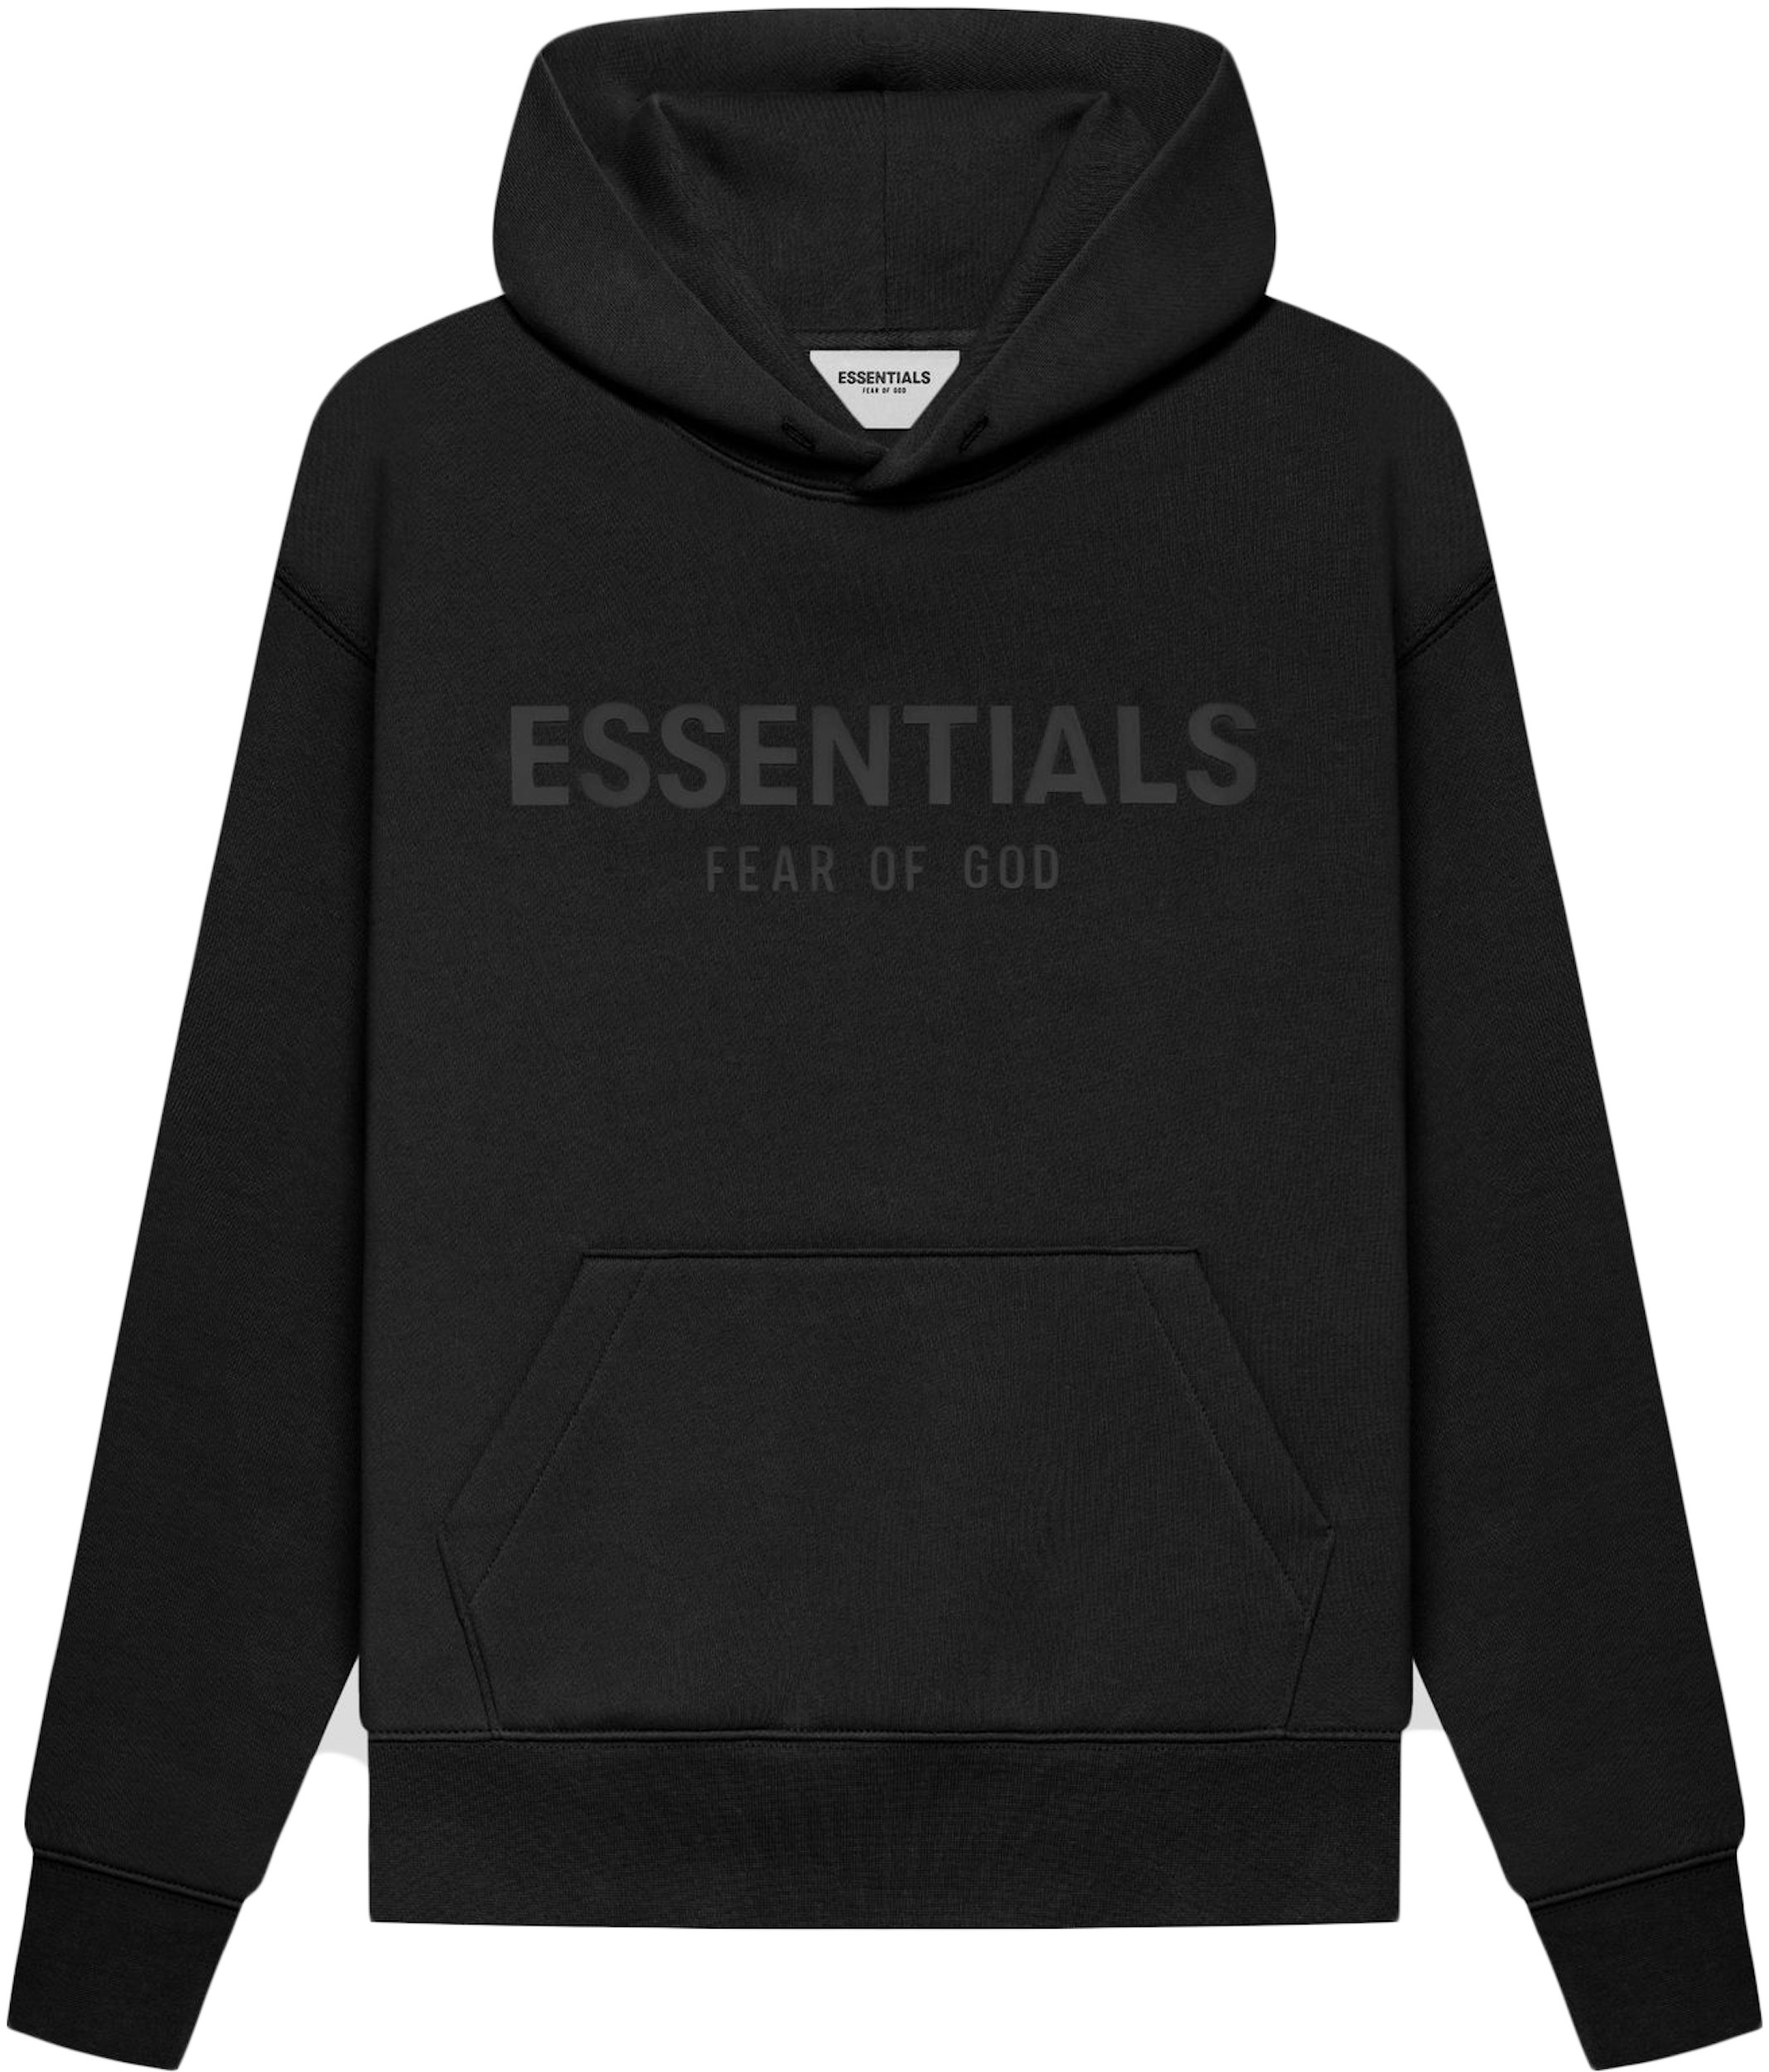 Fear of God Essentials Kids Pull-Over Hoodie Black/Stretch Limo - SS21